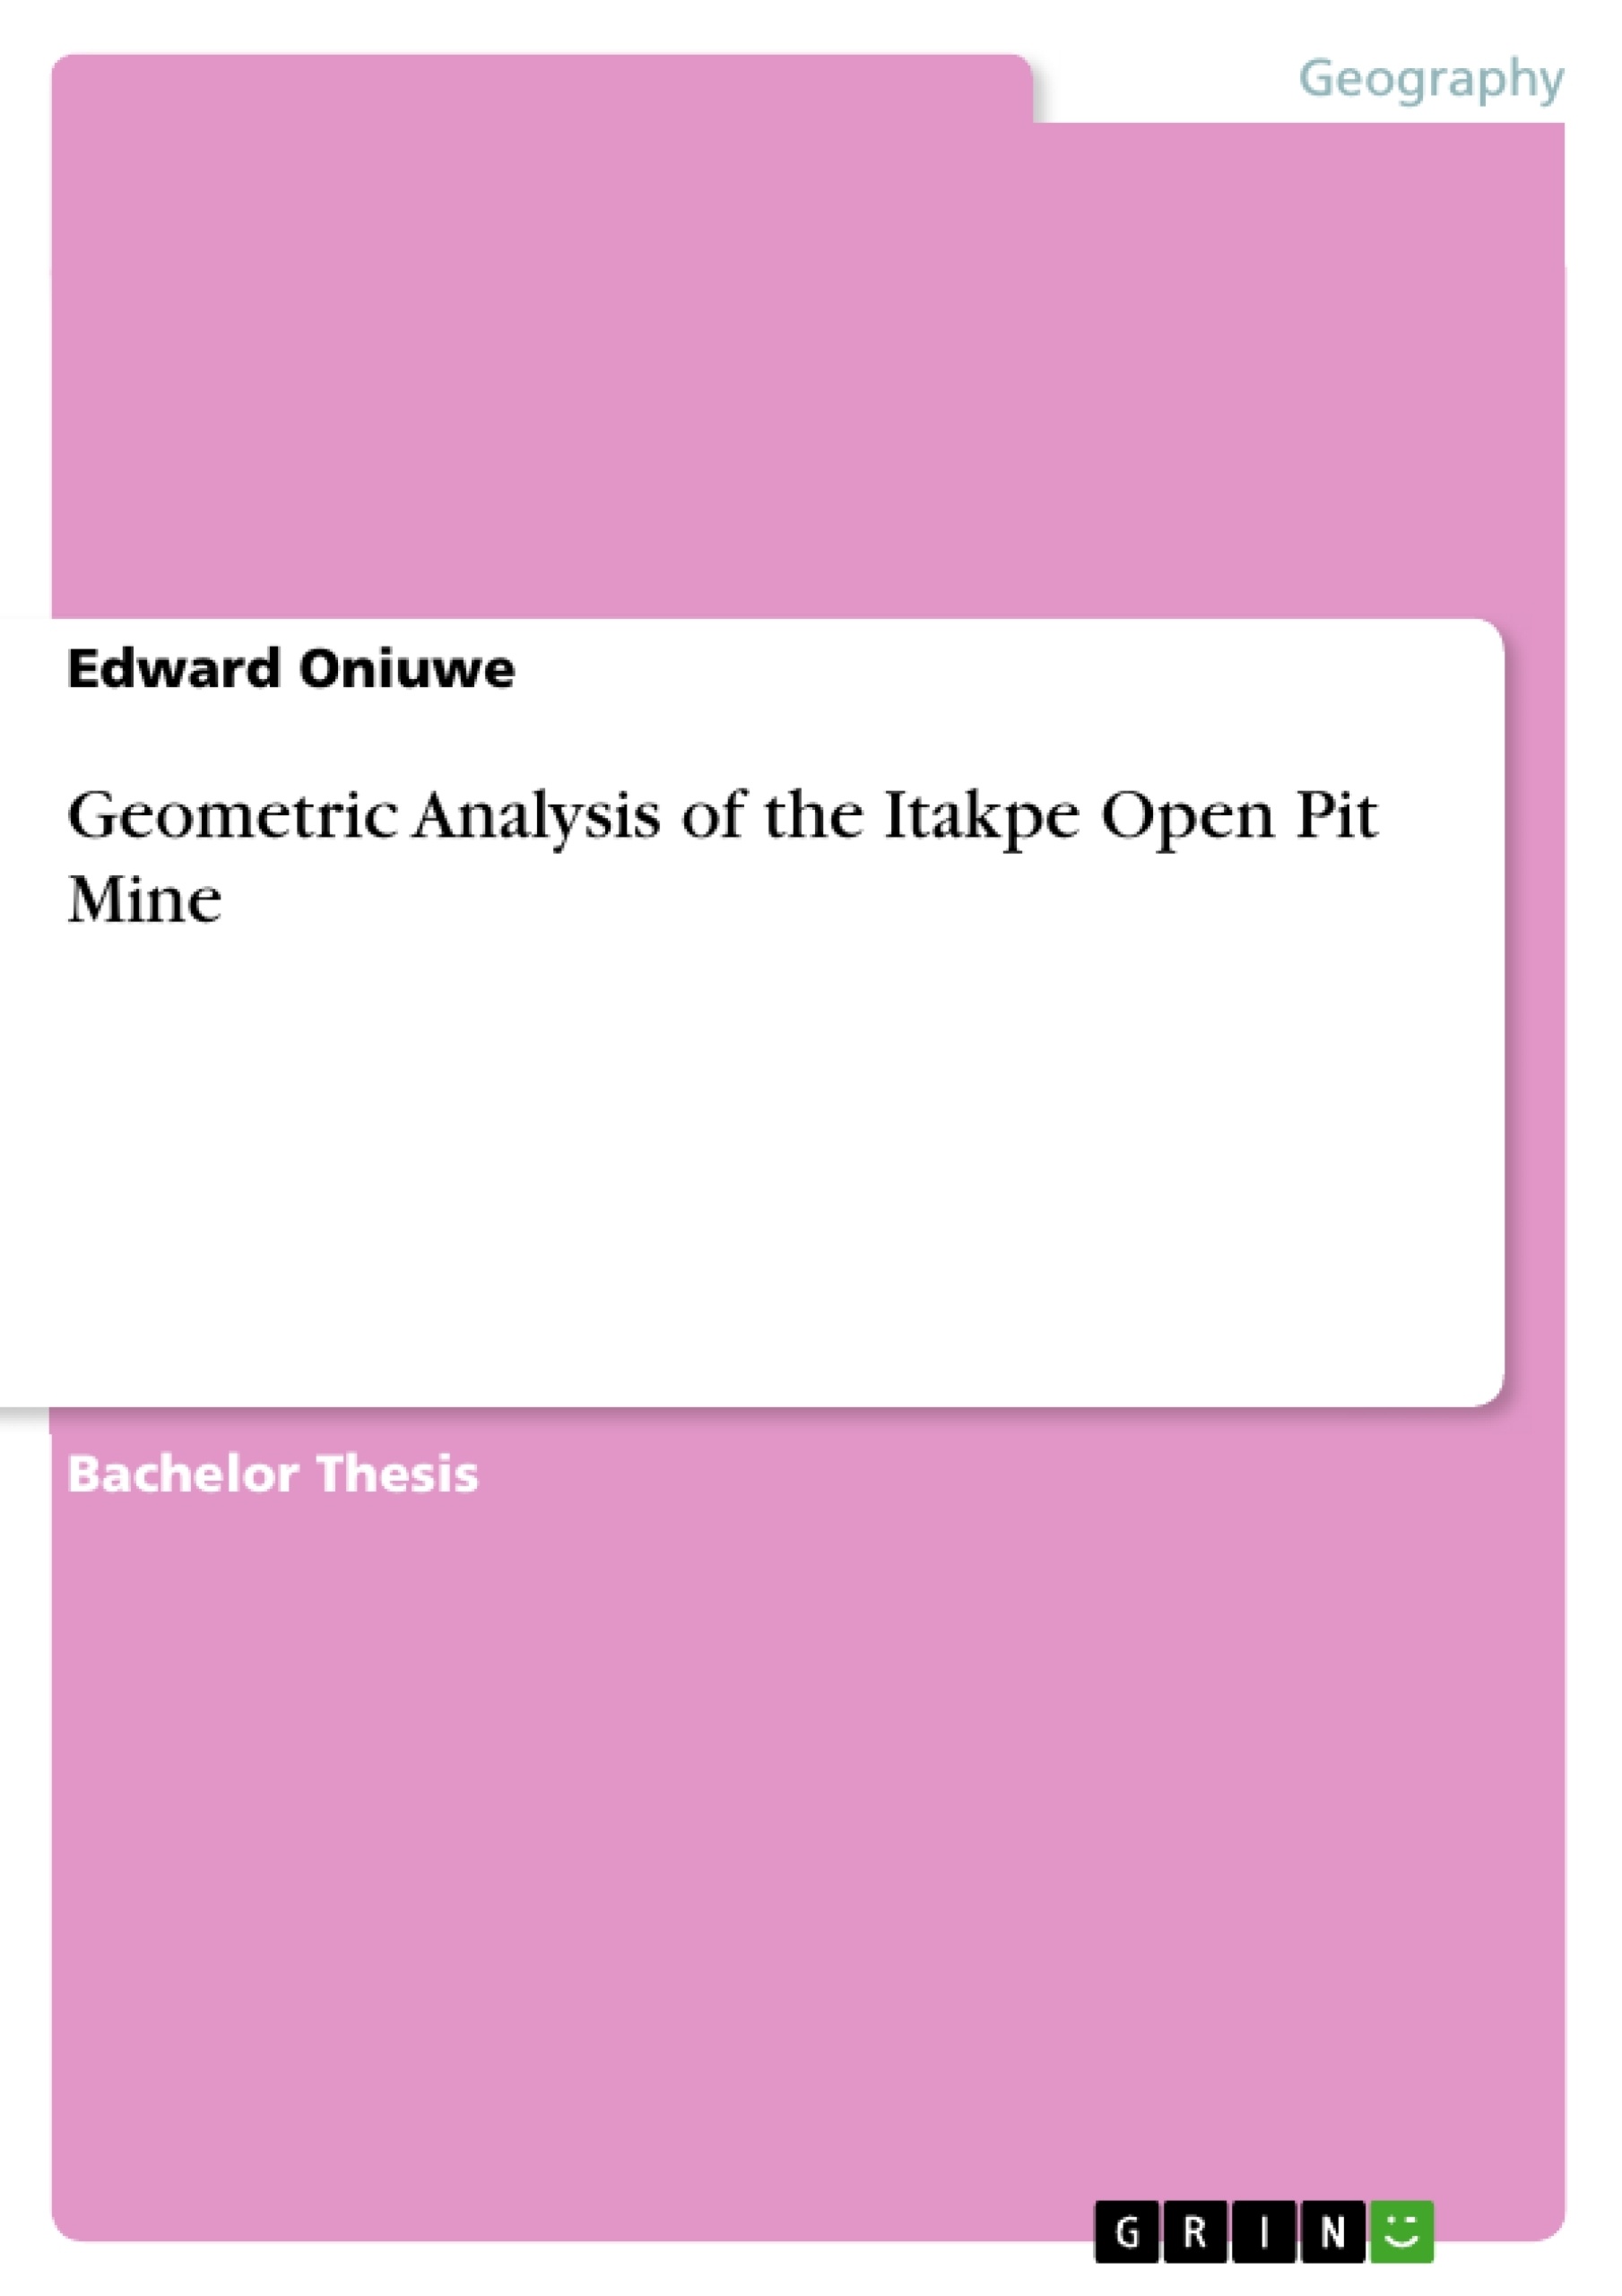 Title: Geometric Analysis of the Itakpe Open Pit Mine